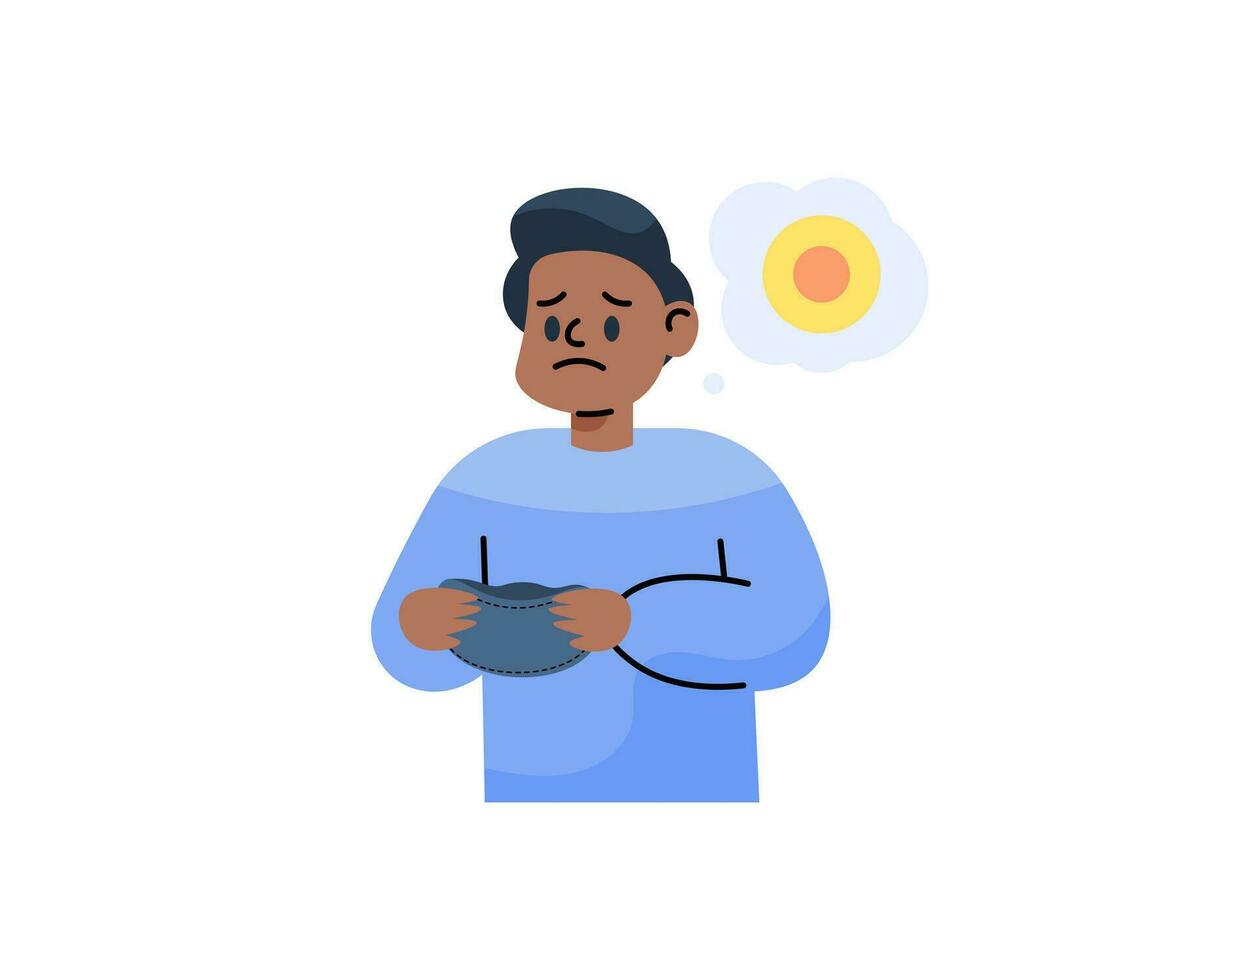 illustration of a man sad because he has no money. chase. the money in the wallet is gone. running out or not having money. Financial Problem. flat or cartoon style illustration design. graphic vector